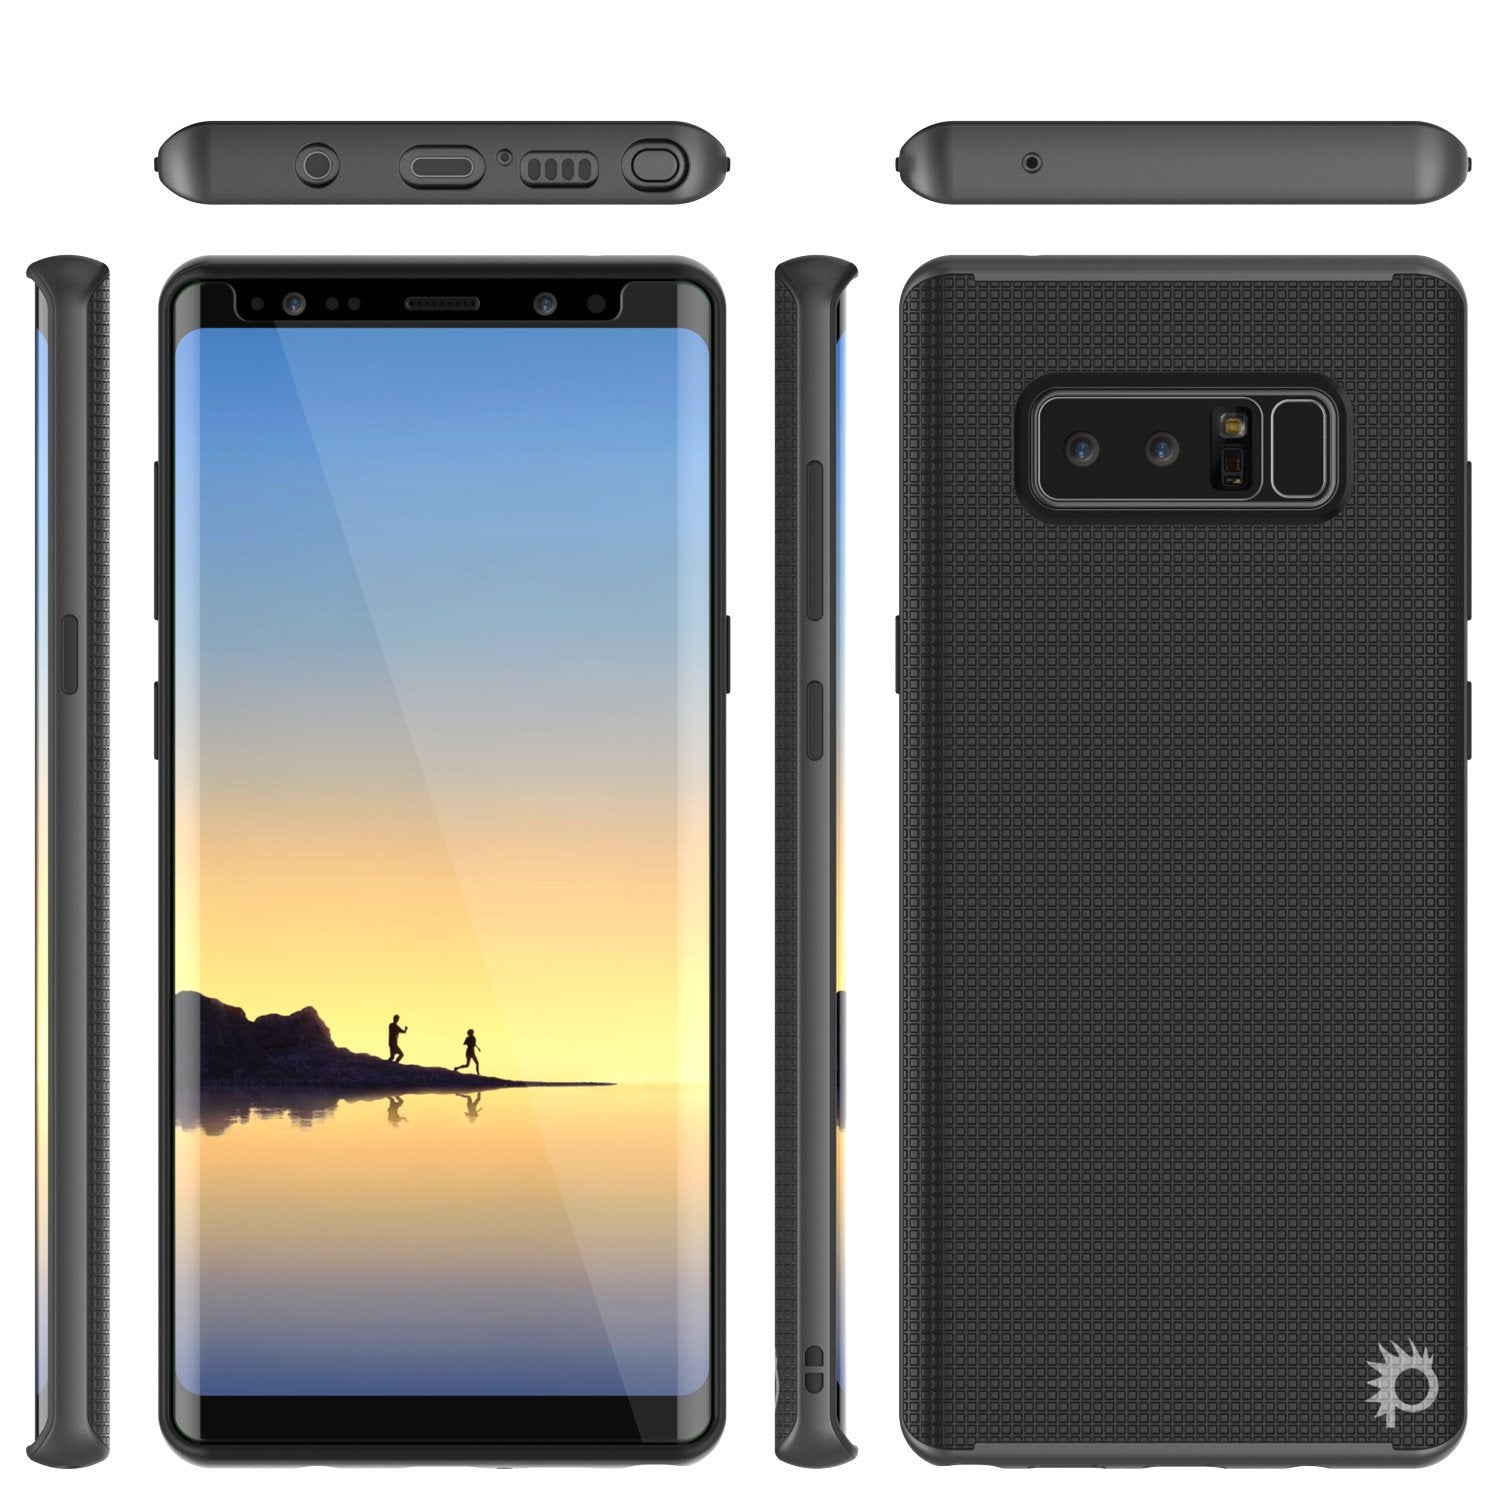 Galaxy Note 8 Case, PunkCase Stealth Grey Series Hybrid 3-Piece Shockproof Dual Layer Cover